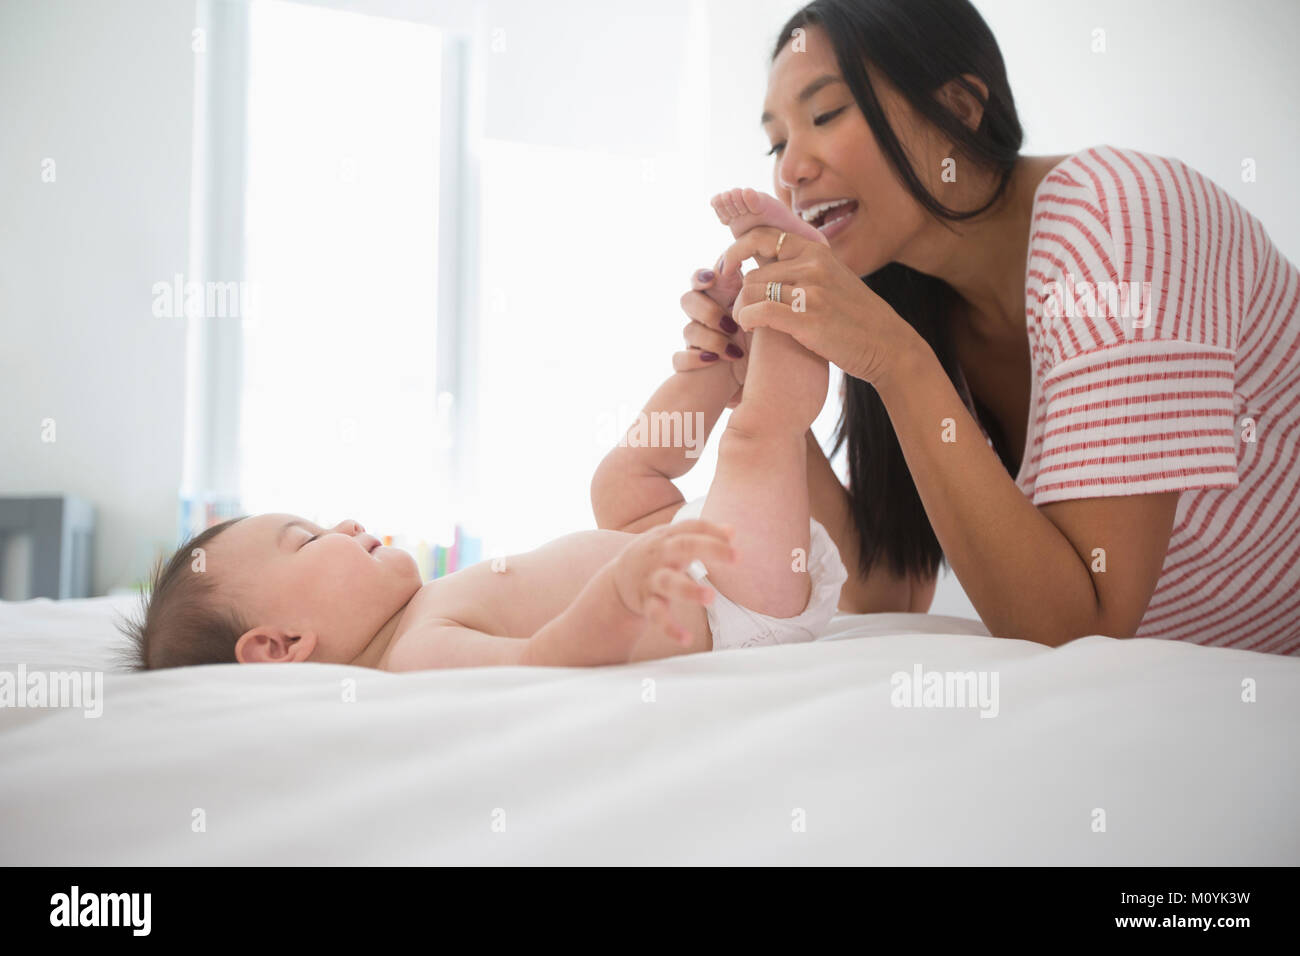 Mother playing with feet of baby son laying on bed Stock Photo